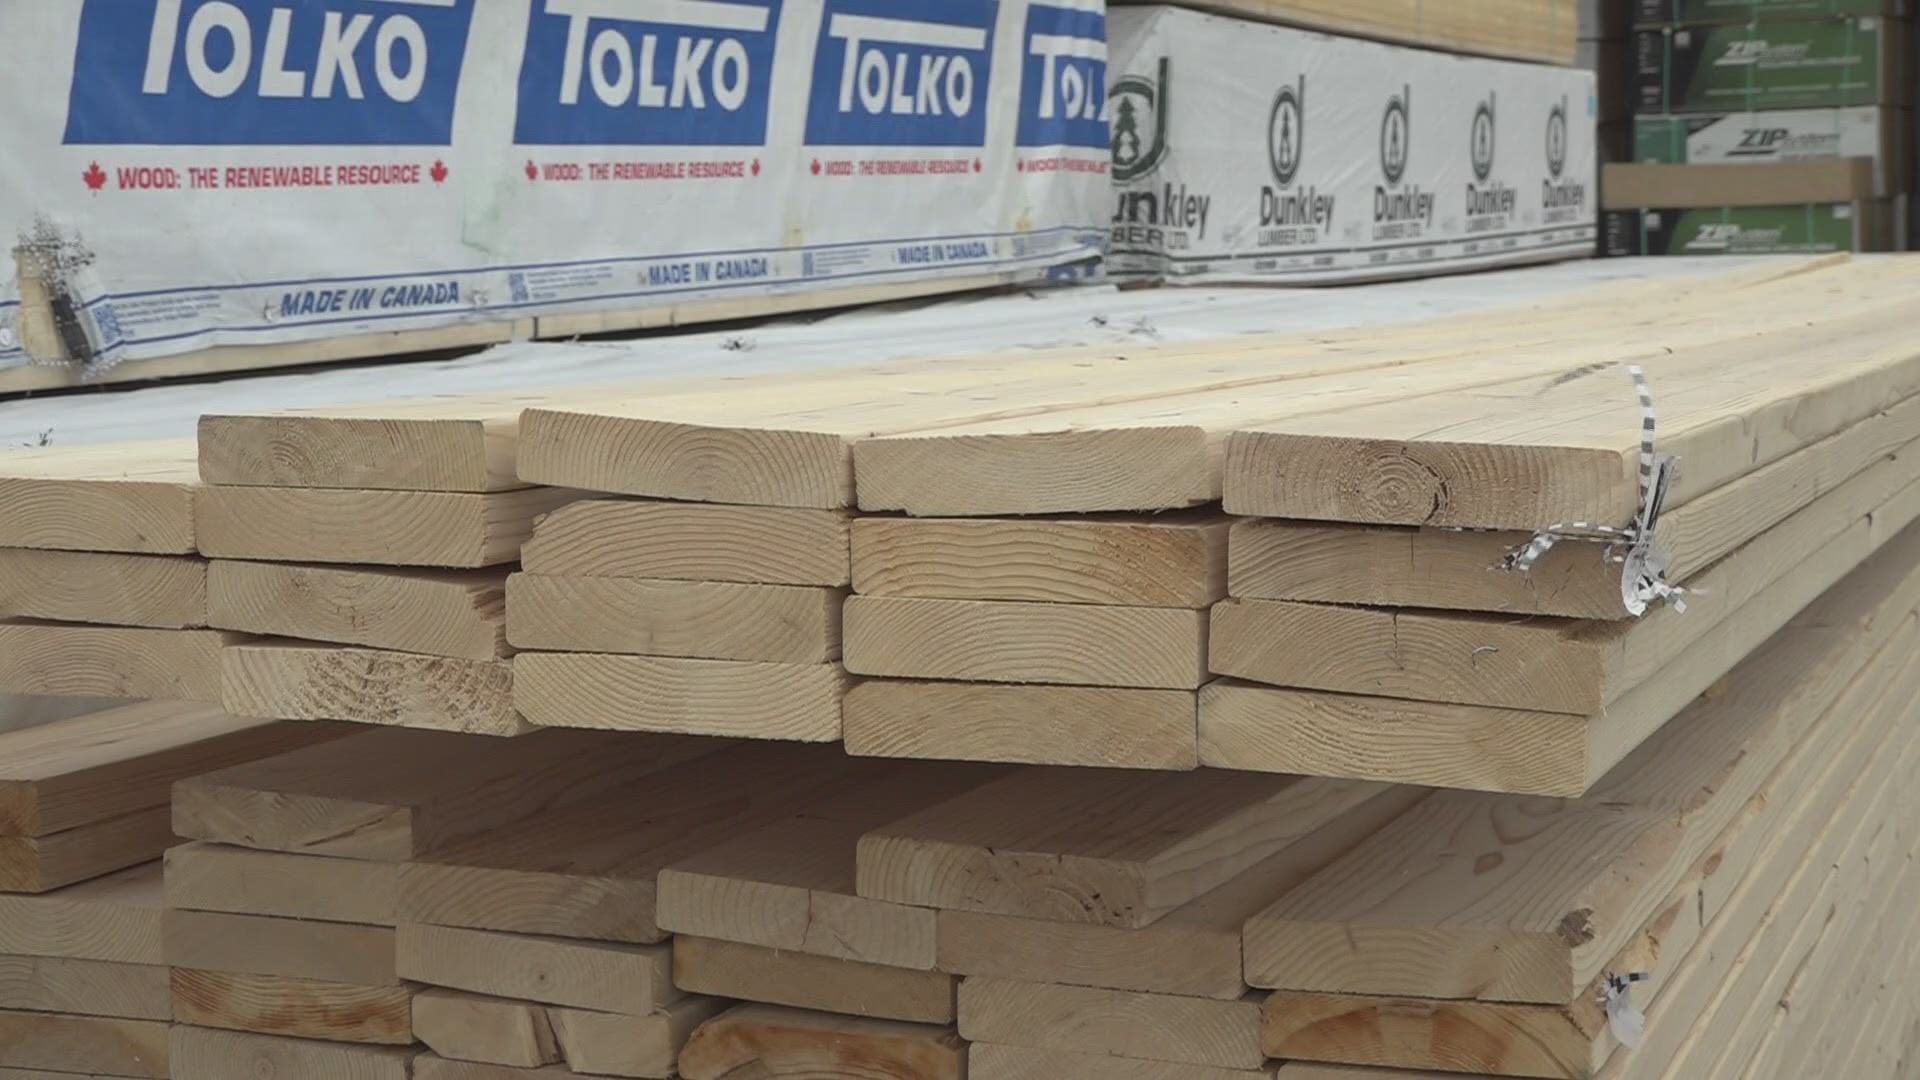 Whether you're building a house or renovating space, the demand for lumber and its price has risen which has also made an impact on woodworking and lumber companies.